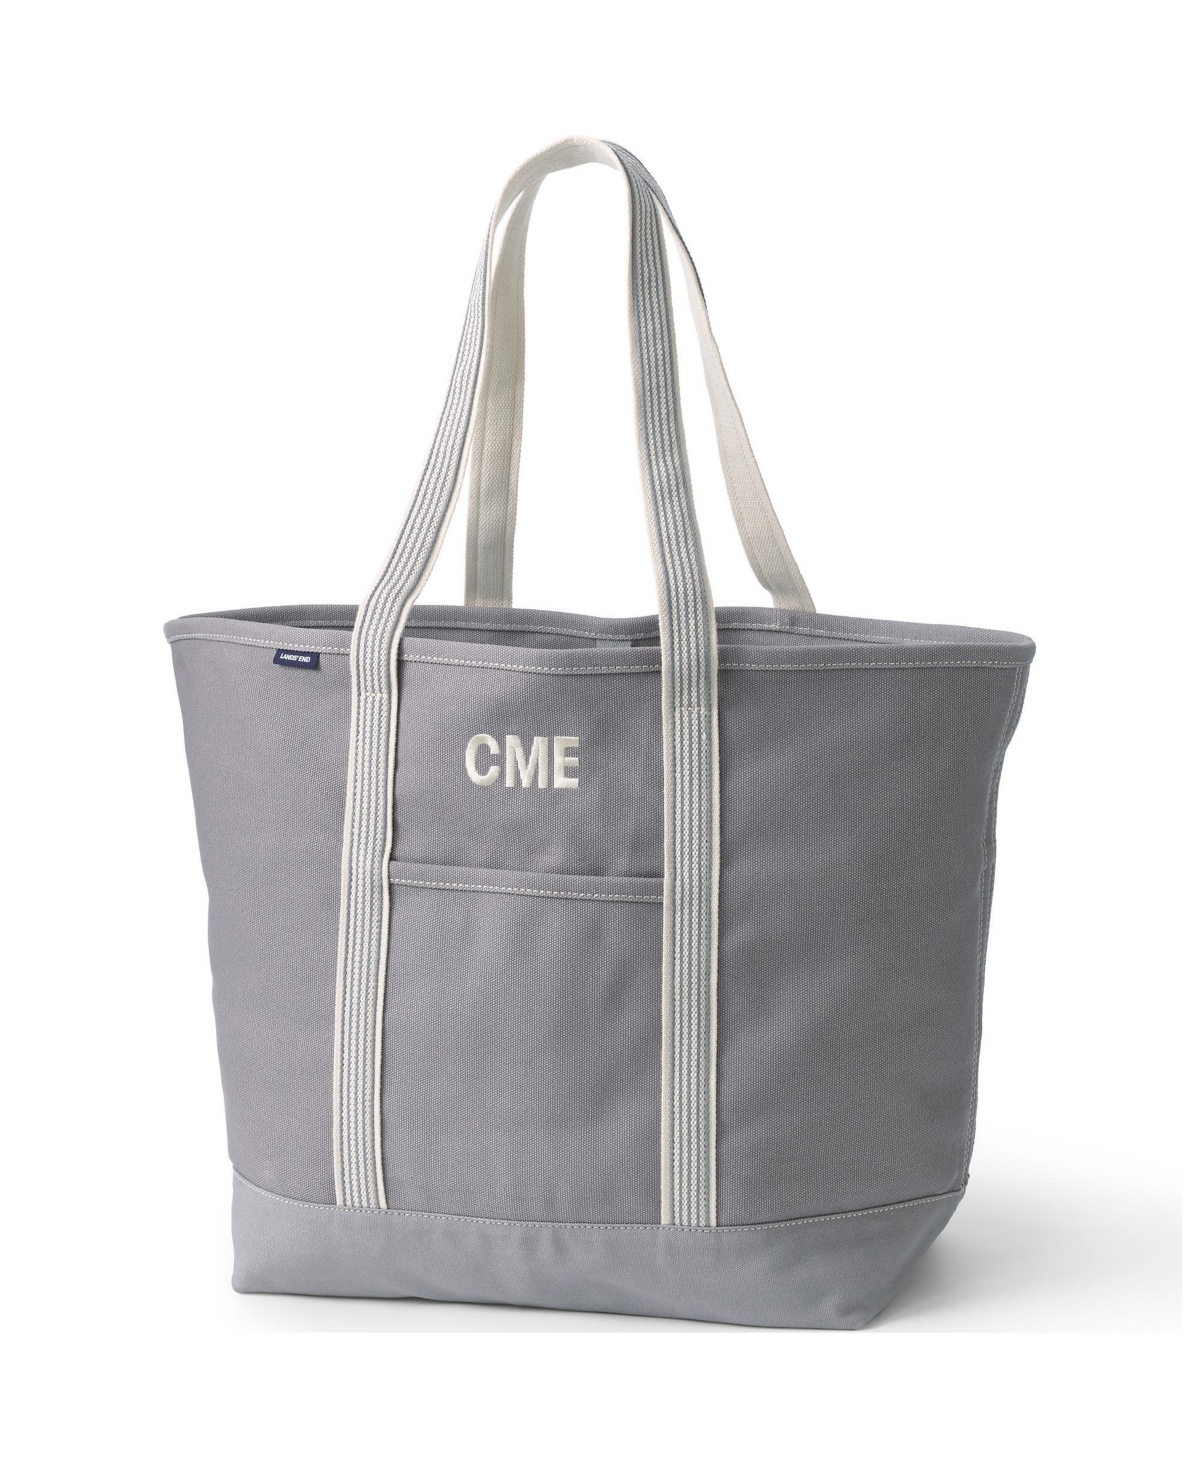 Extra Large Solid Color 5 Pocket Open Top Long Handle Canvas Tote Bag - Silver graphite